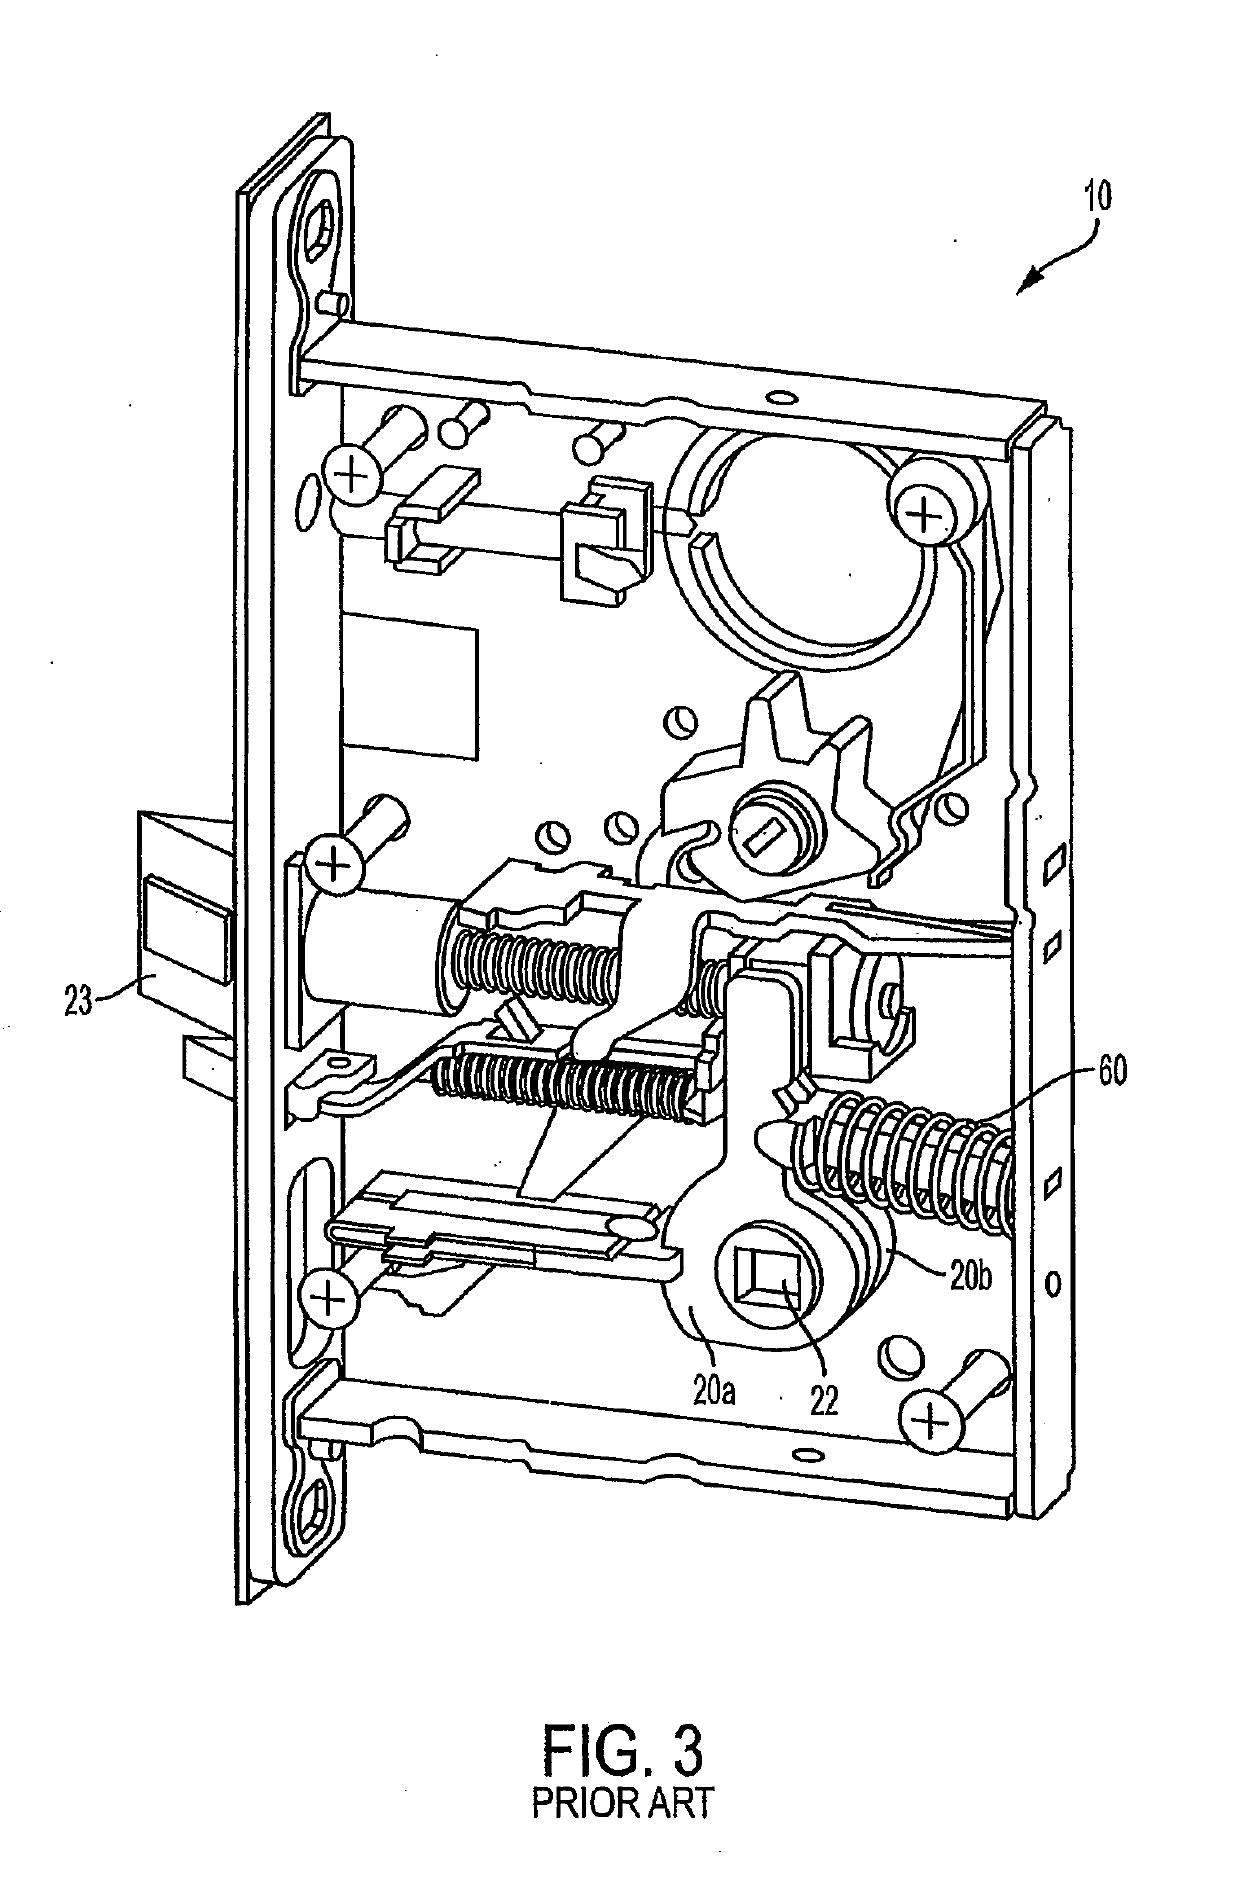 Mortise lock with multi-point latch system